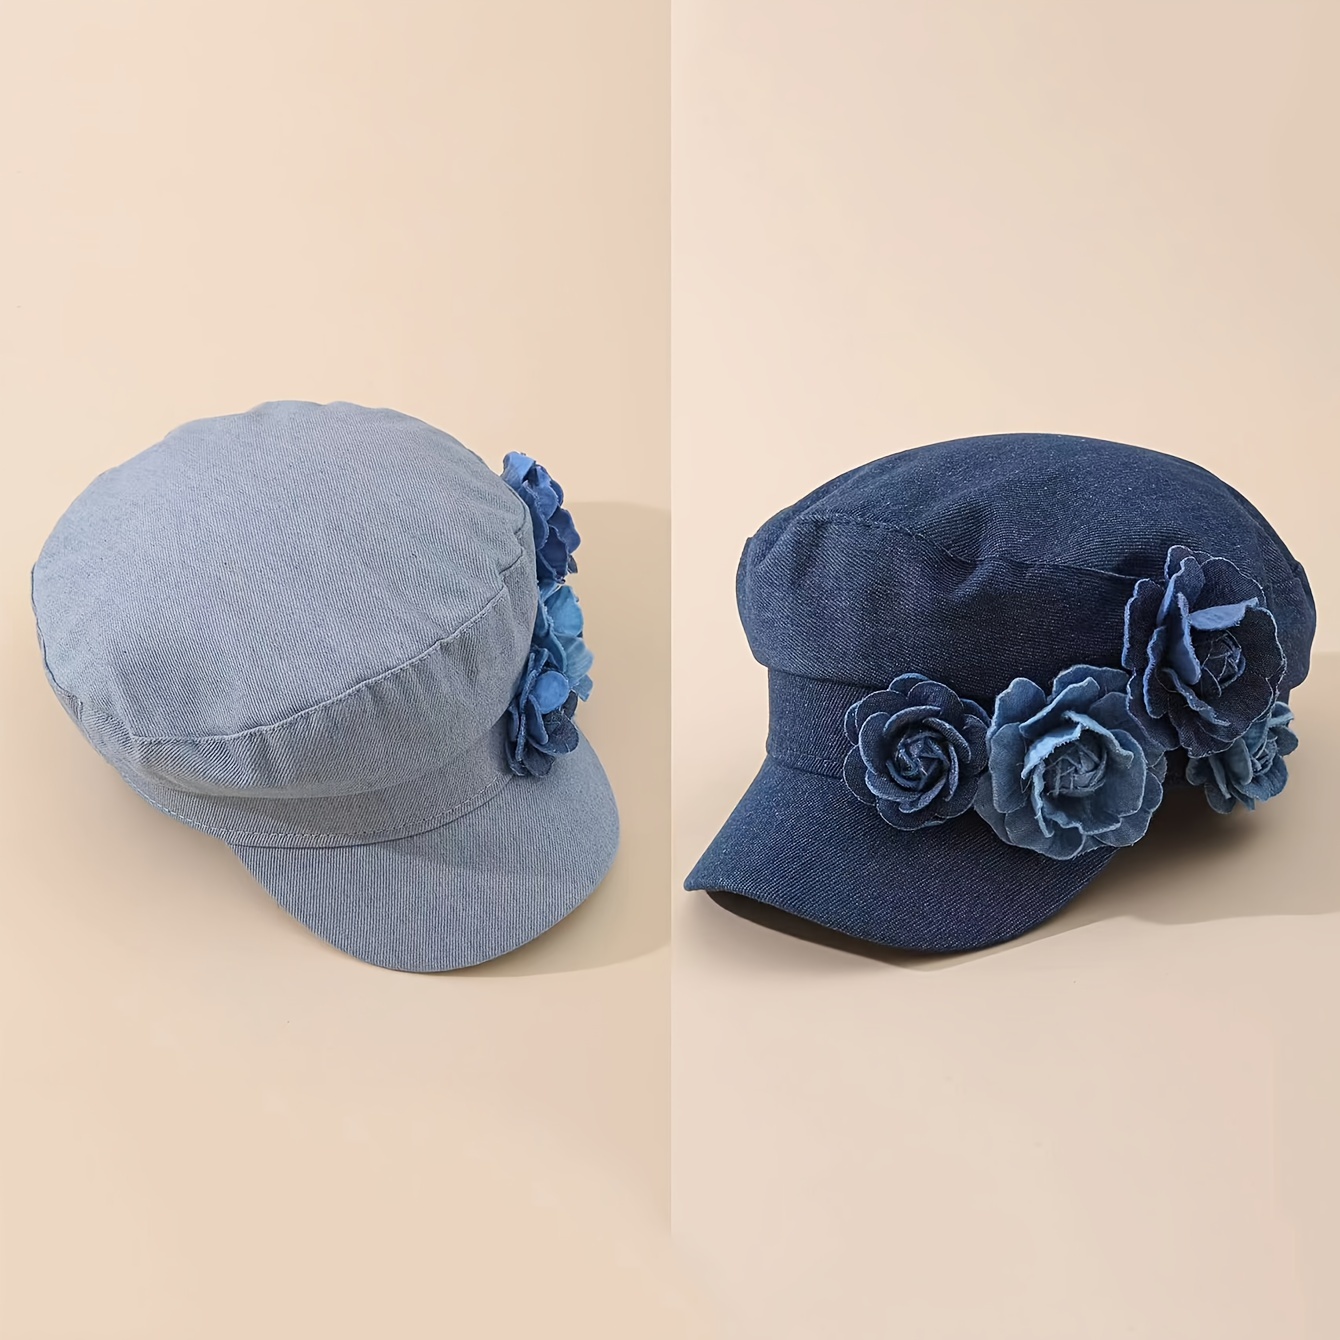 

Women's Polyester Denim Beret With Decorative Flowers - Elegant Sweet Style Flat Top Navy Cap For Large Head Sizes, Sun Protection, Non-stretch, Woven Craftsmanship For New Year's Occasions - 57cm